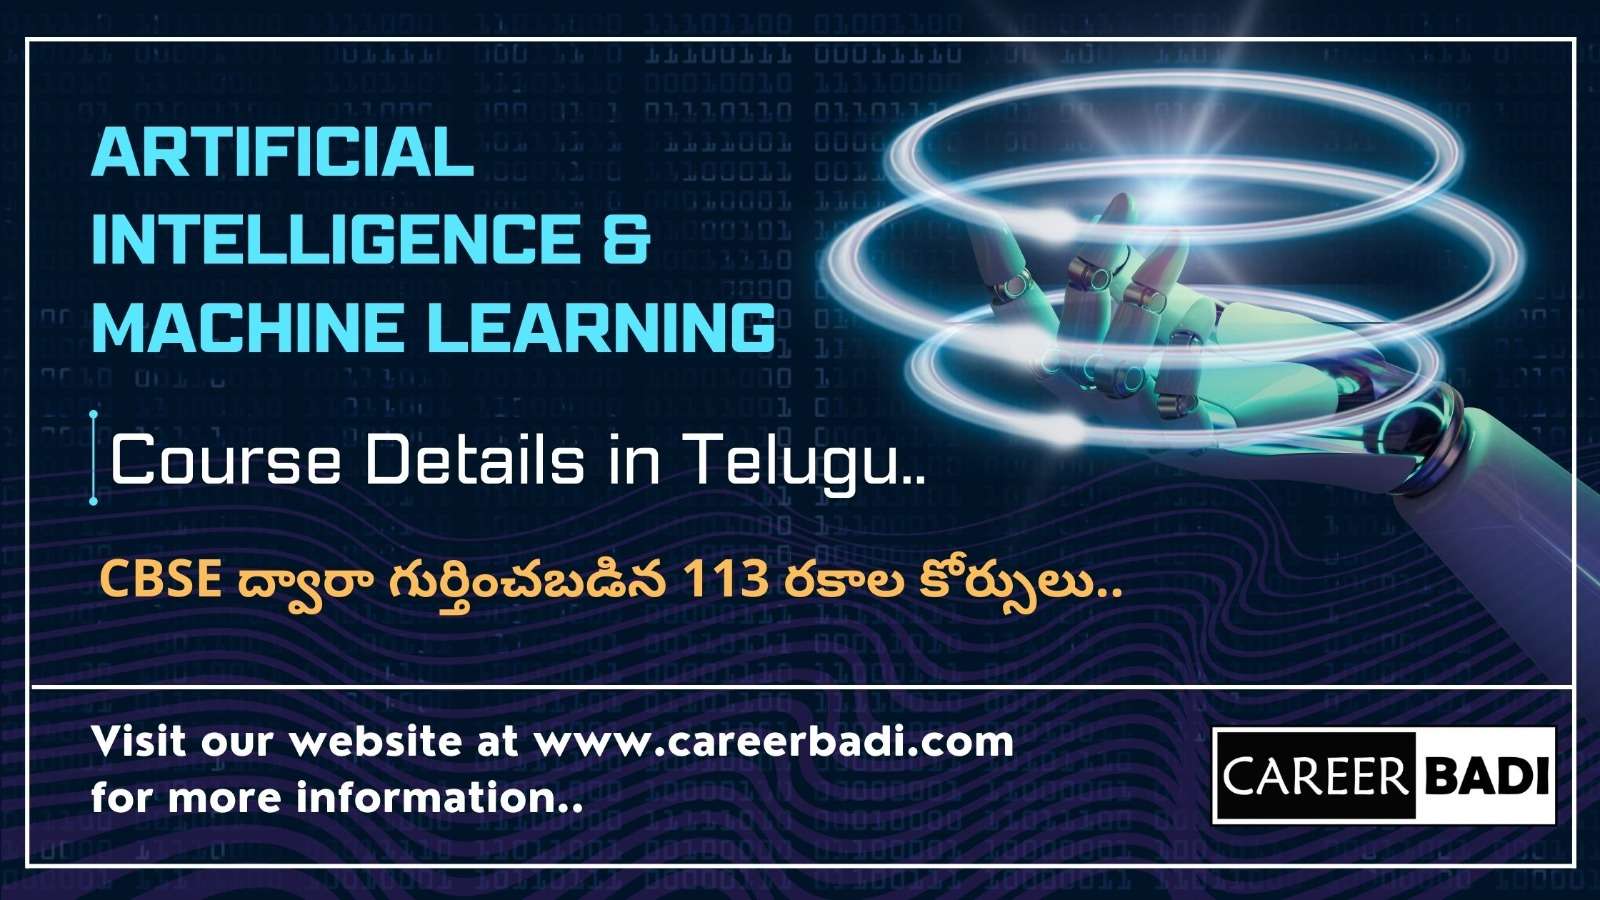 Artificial Intelligence & Machine Learning Course Details In Telugu